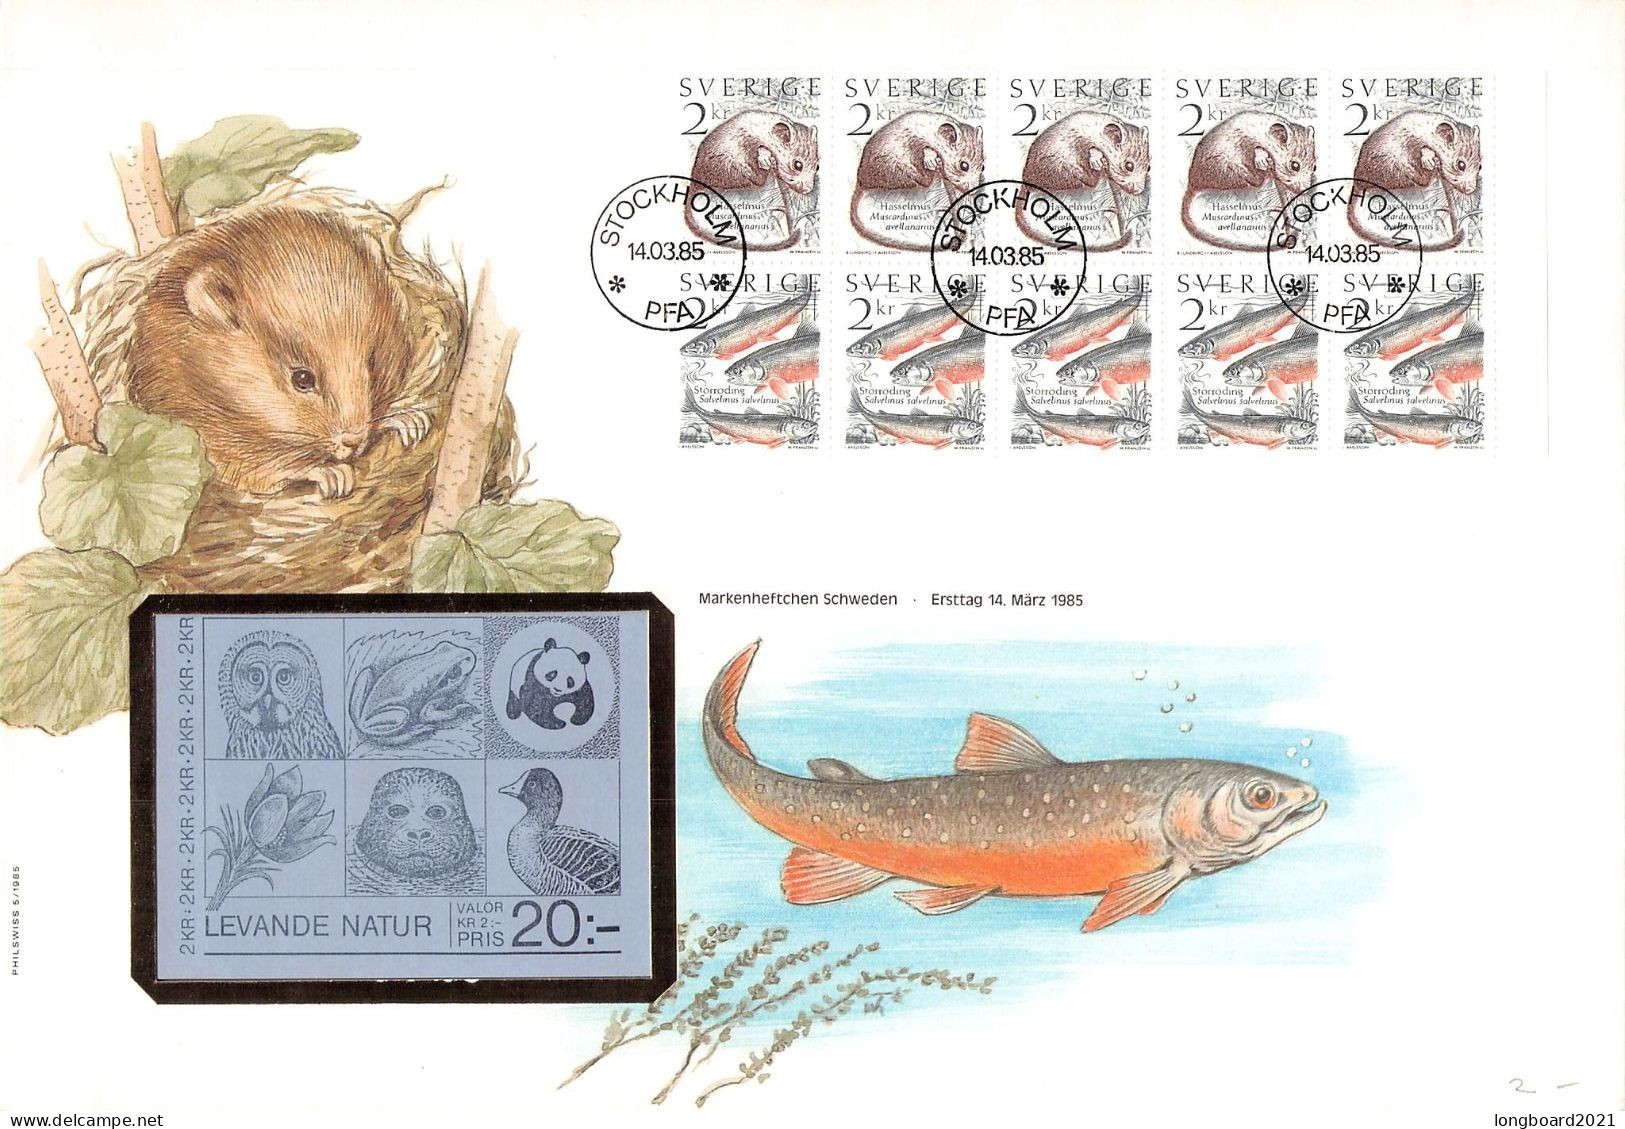 SWEDEN - FDC 1985 BOOKLET ANIMALS /4365 - FDC